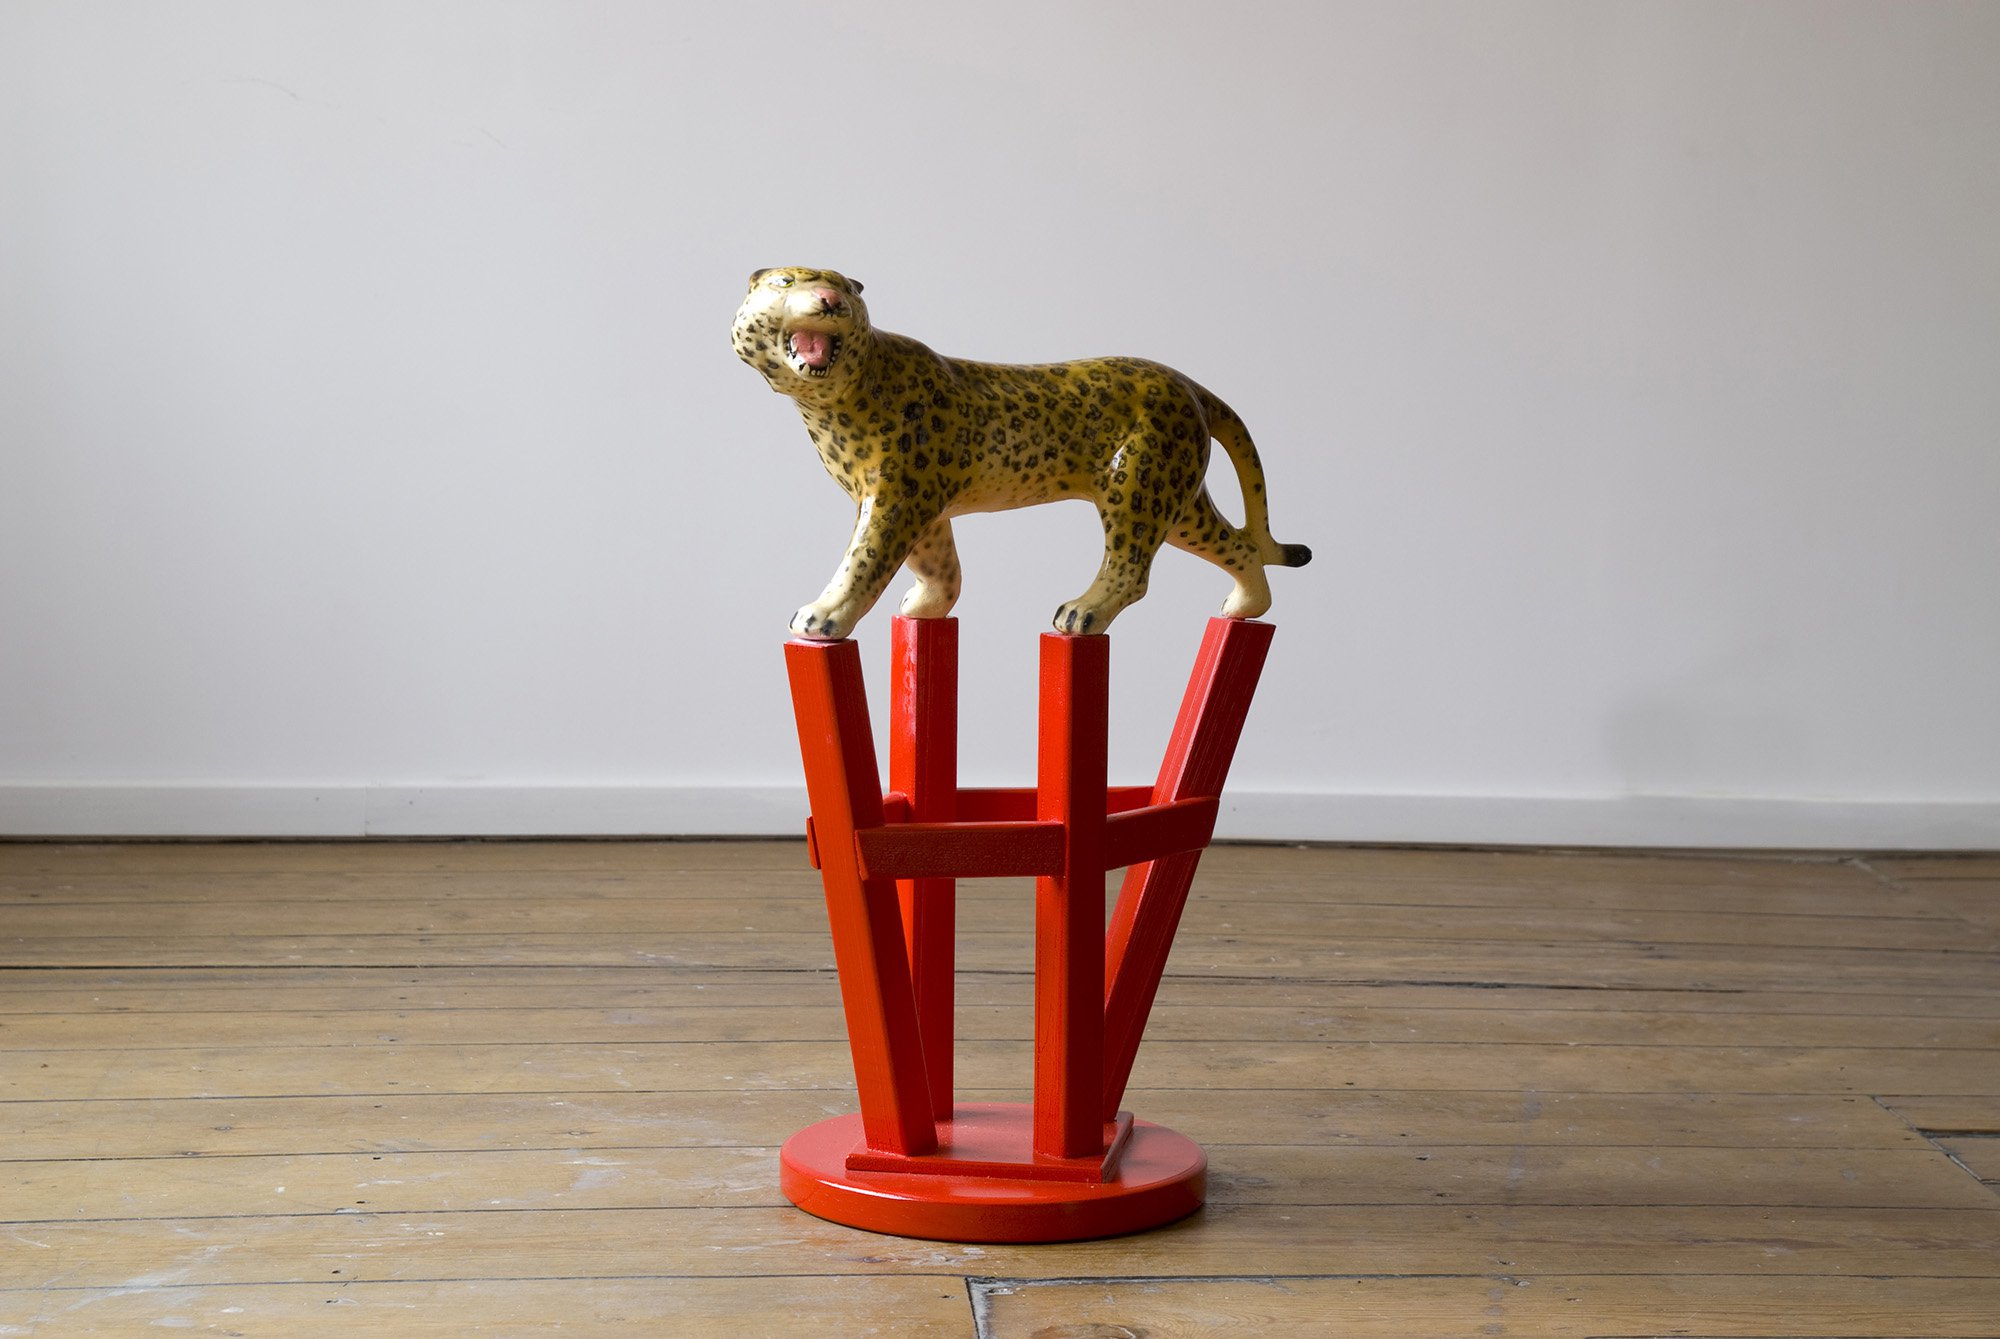 Gülsün Karamustafa, Panther Stool, porcelain panther, wooden stool, 65cm height (25 5/8 in height), 2007. Installation view, Opening, Rodeo, Istanbul, 2009